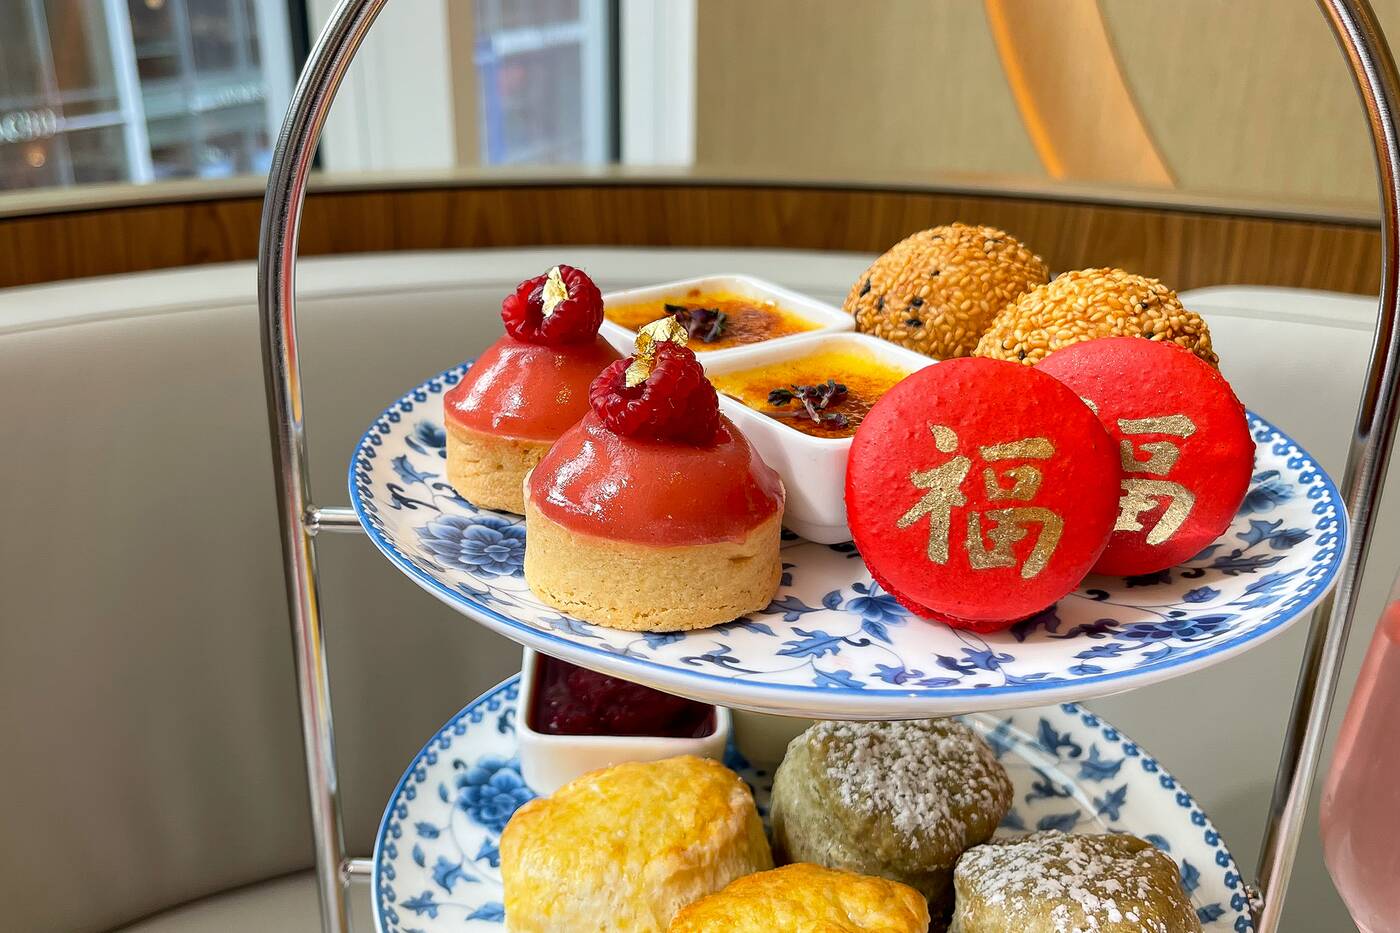 Holts Cafe is hosting a oneofakind Lunar New Year experience in Toronto